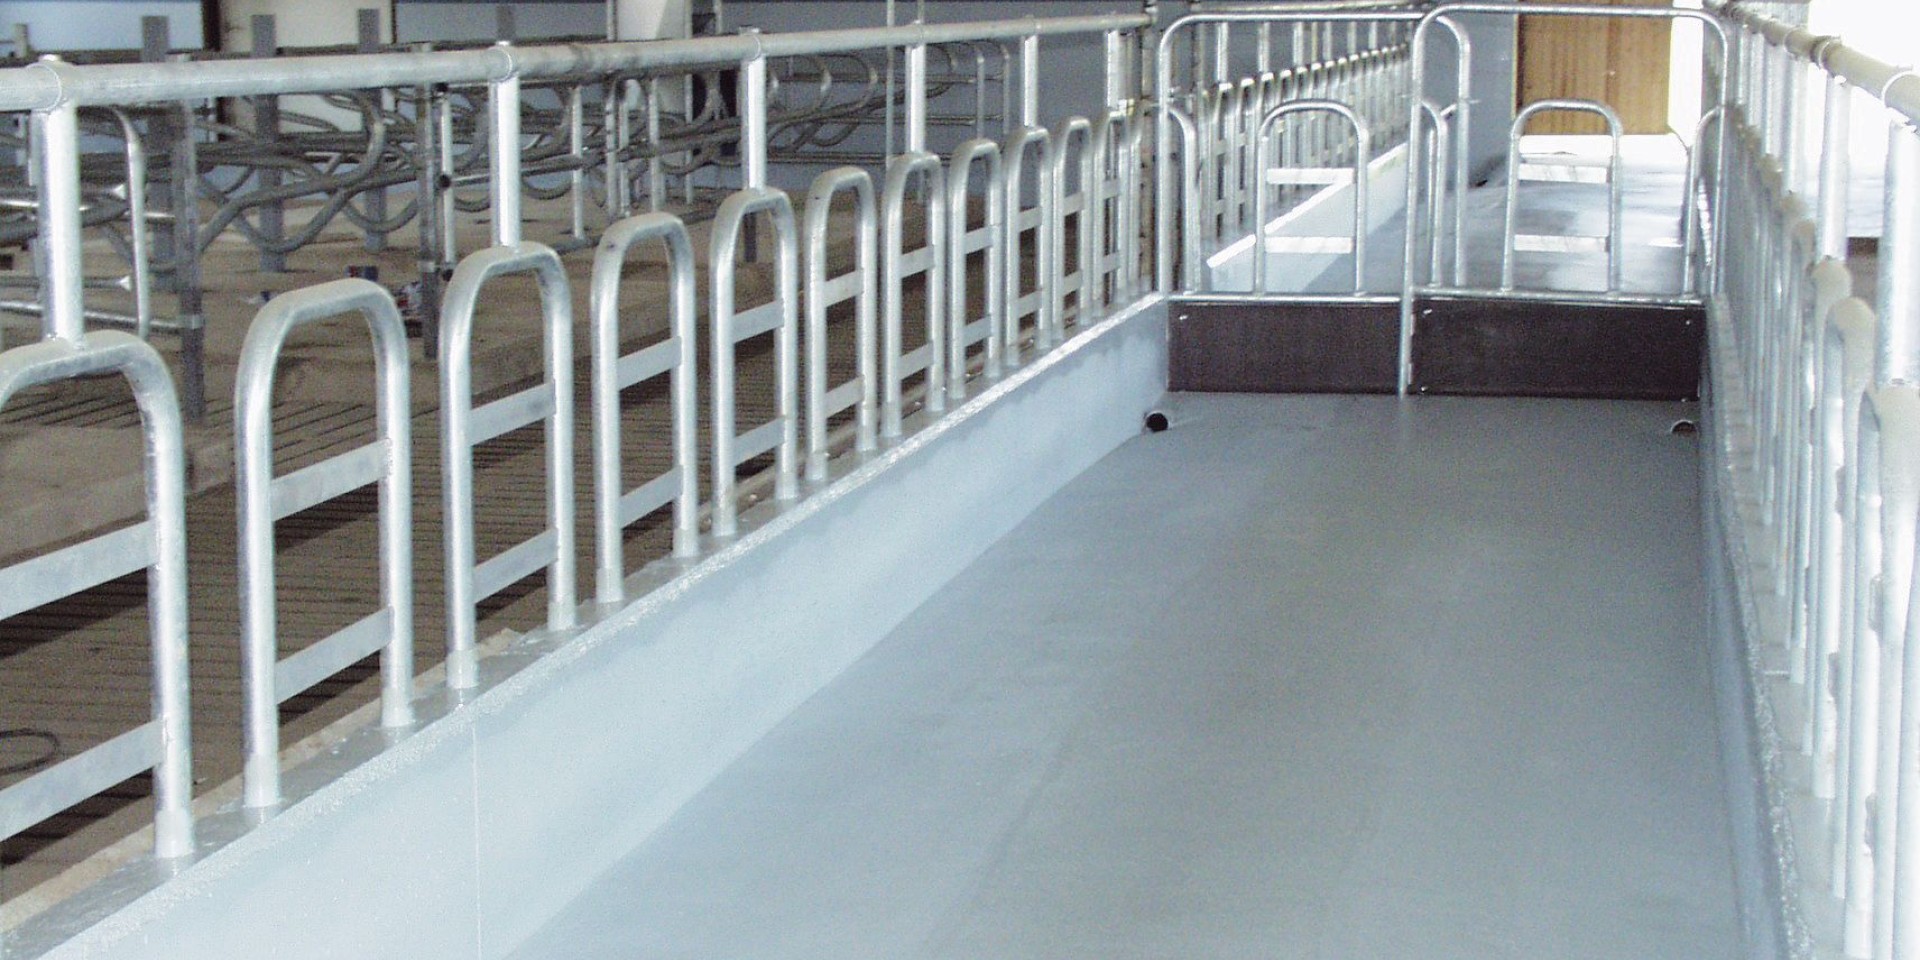 Metal surfaces in farming and agricultural facilities